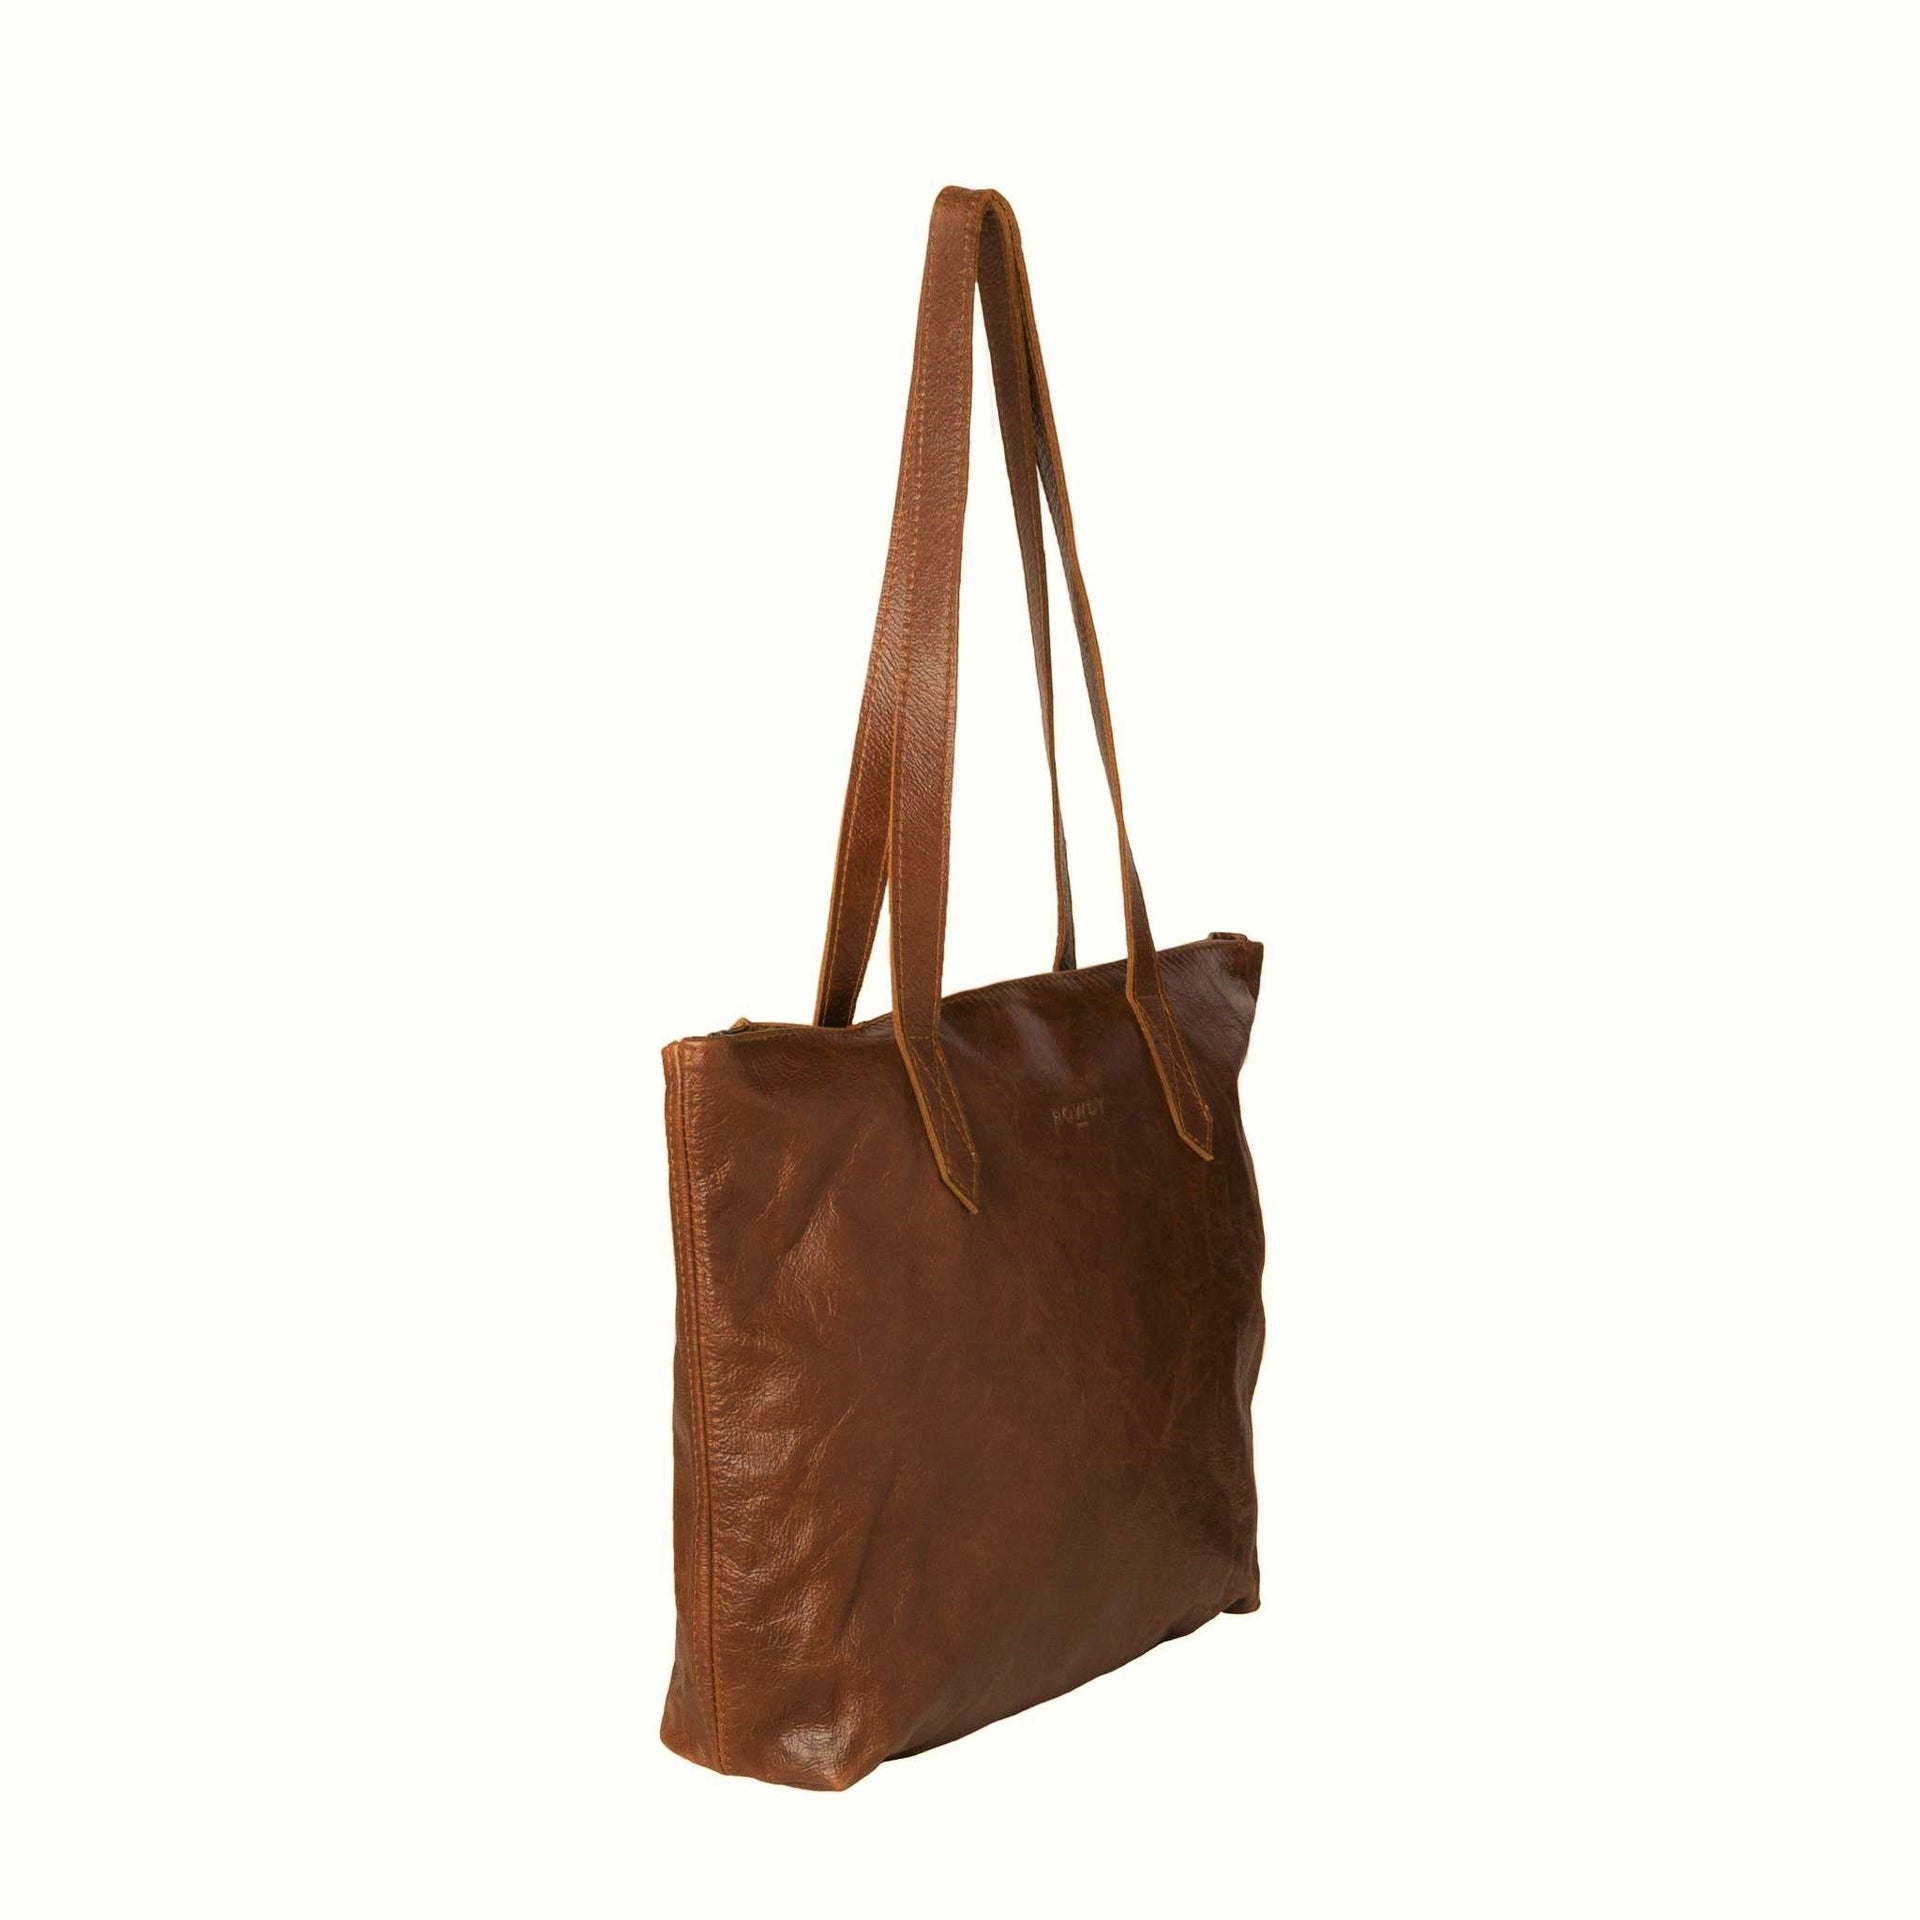 Tote Bag in Rich, Brown Cedar Leather | Leather Tote Bags | ROWDY BAGS